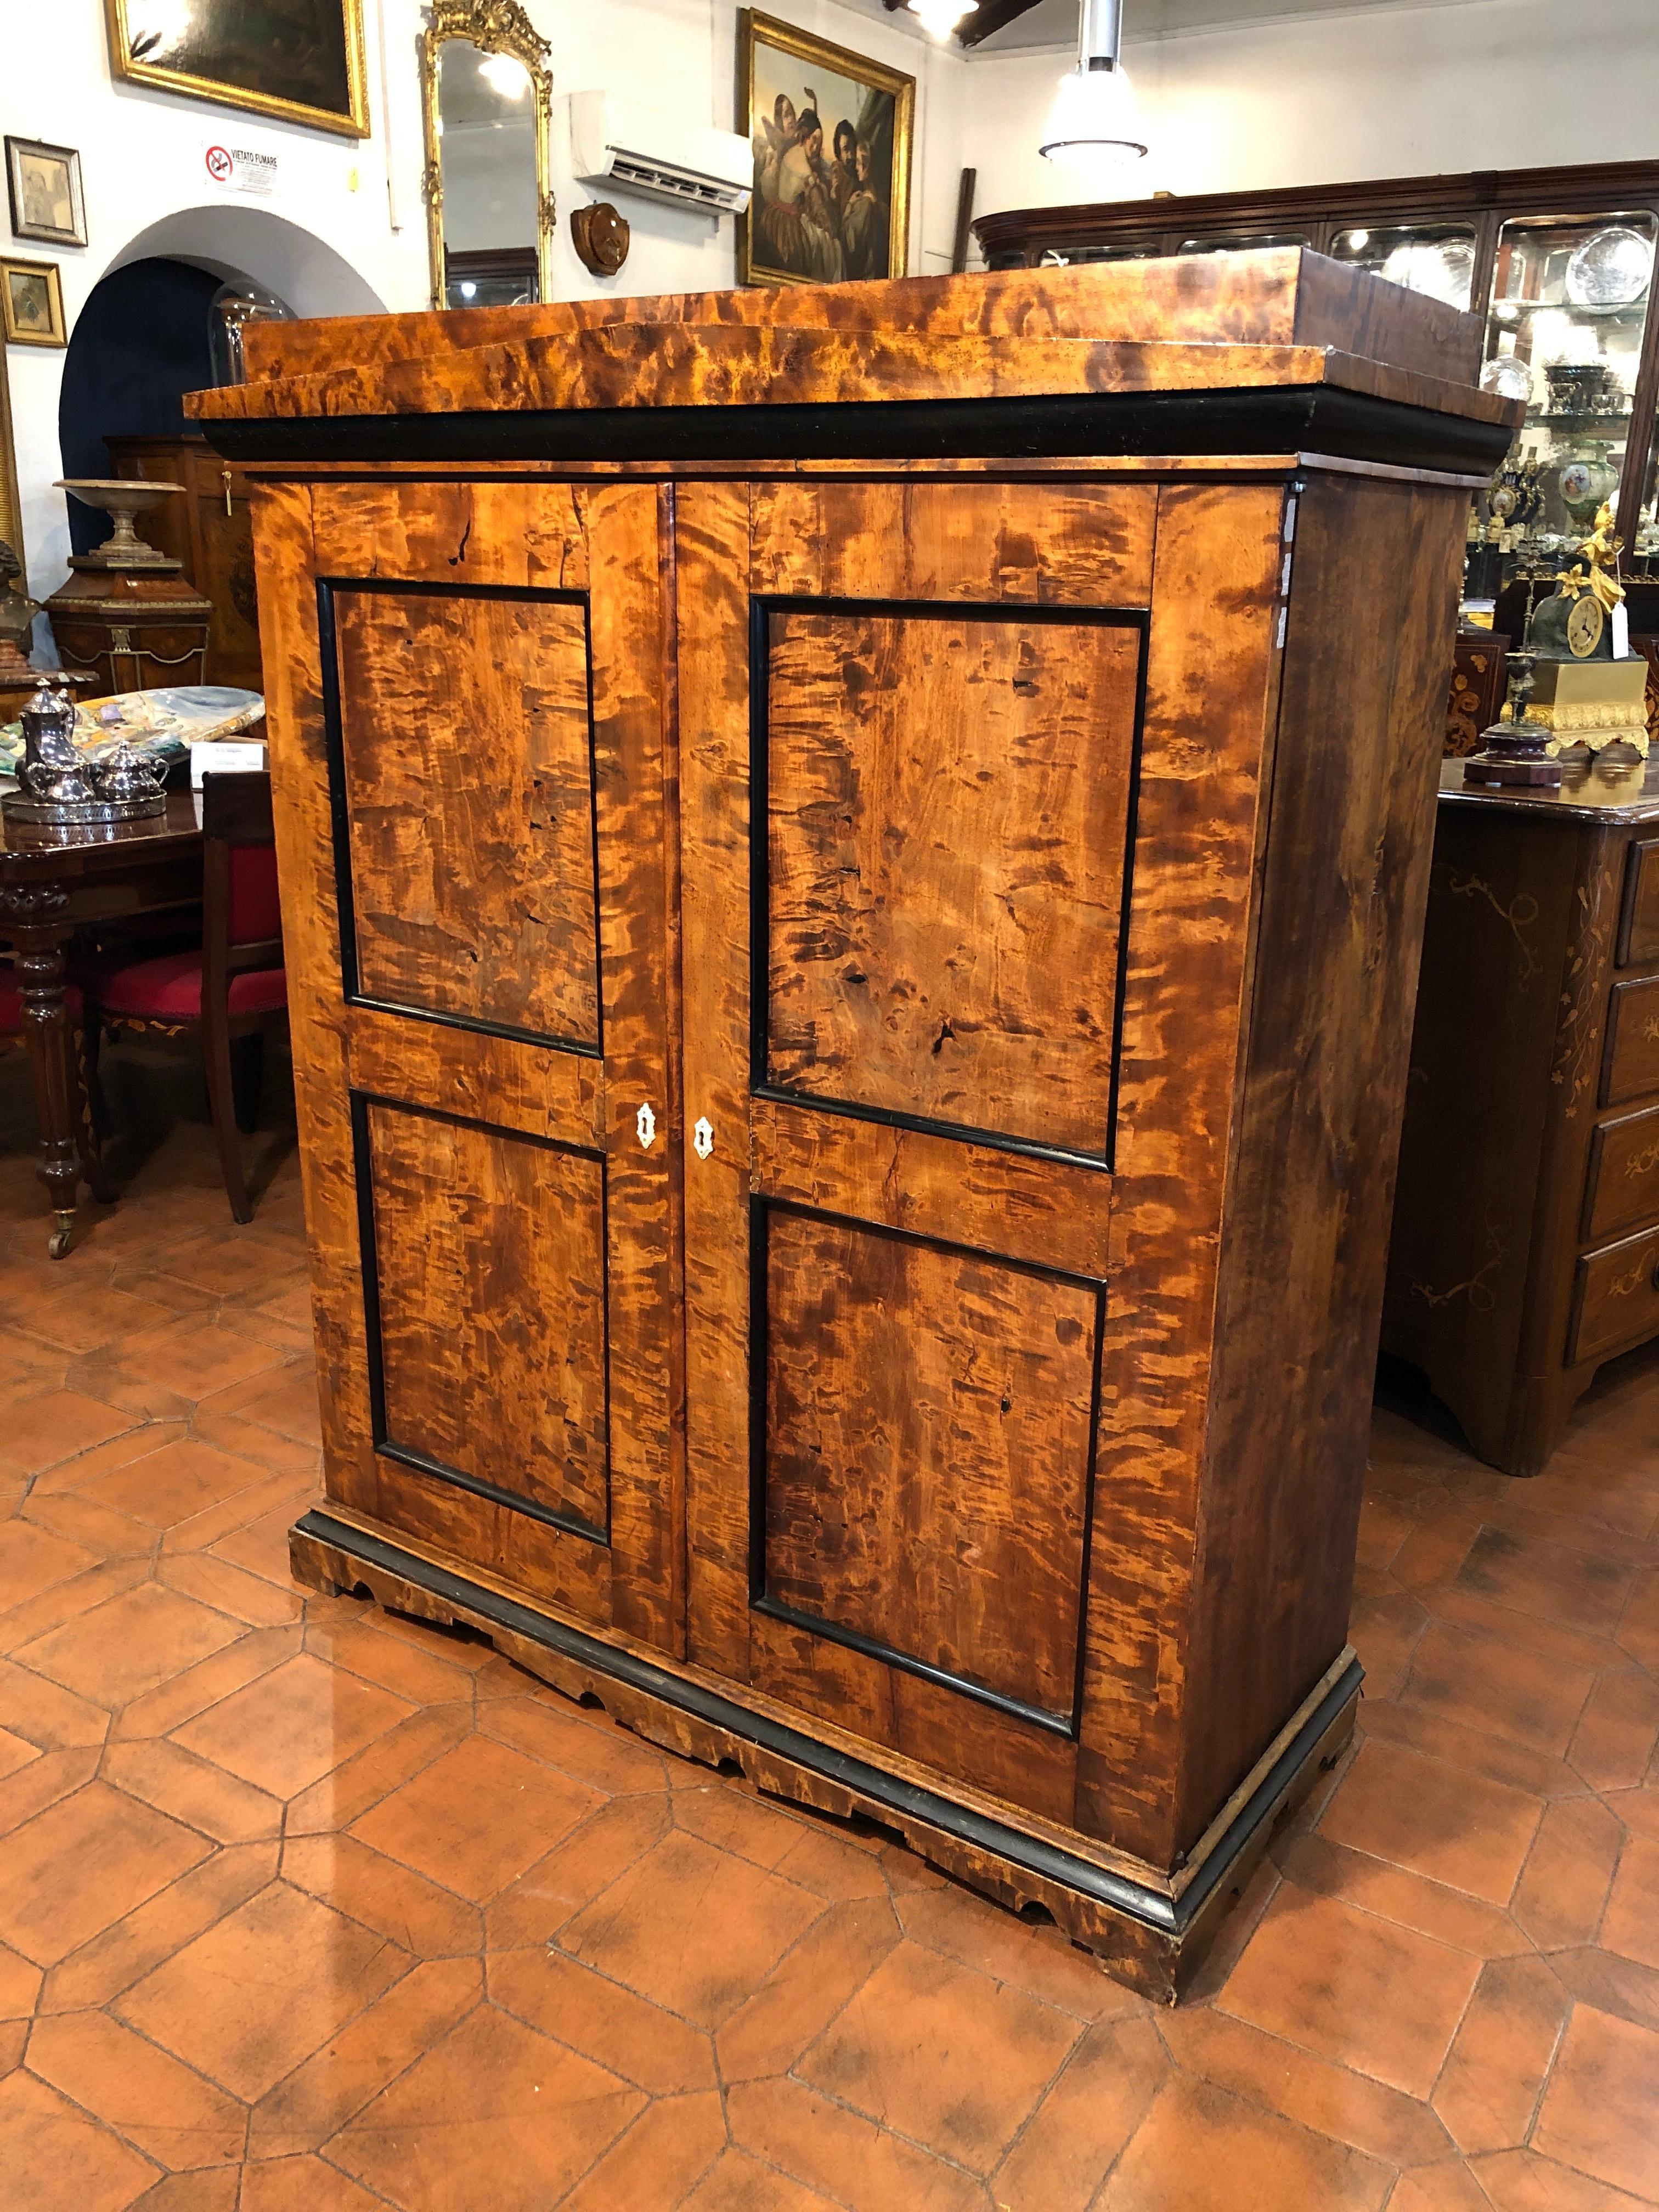 Rare Biedermeier furniture, seeing it looks like a small cabinet, opening the doors we are on the right side a small, elegant, Secretaire, while on the left side a small wardrobe. Small but incredibly useful. The plan hides a secret compartment that